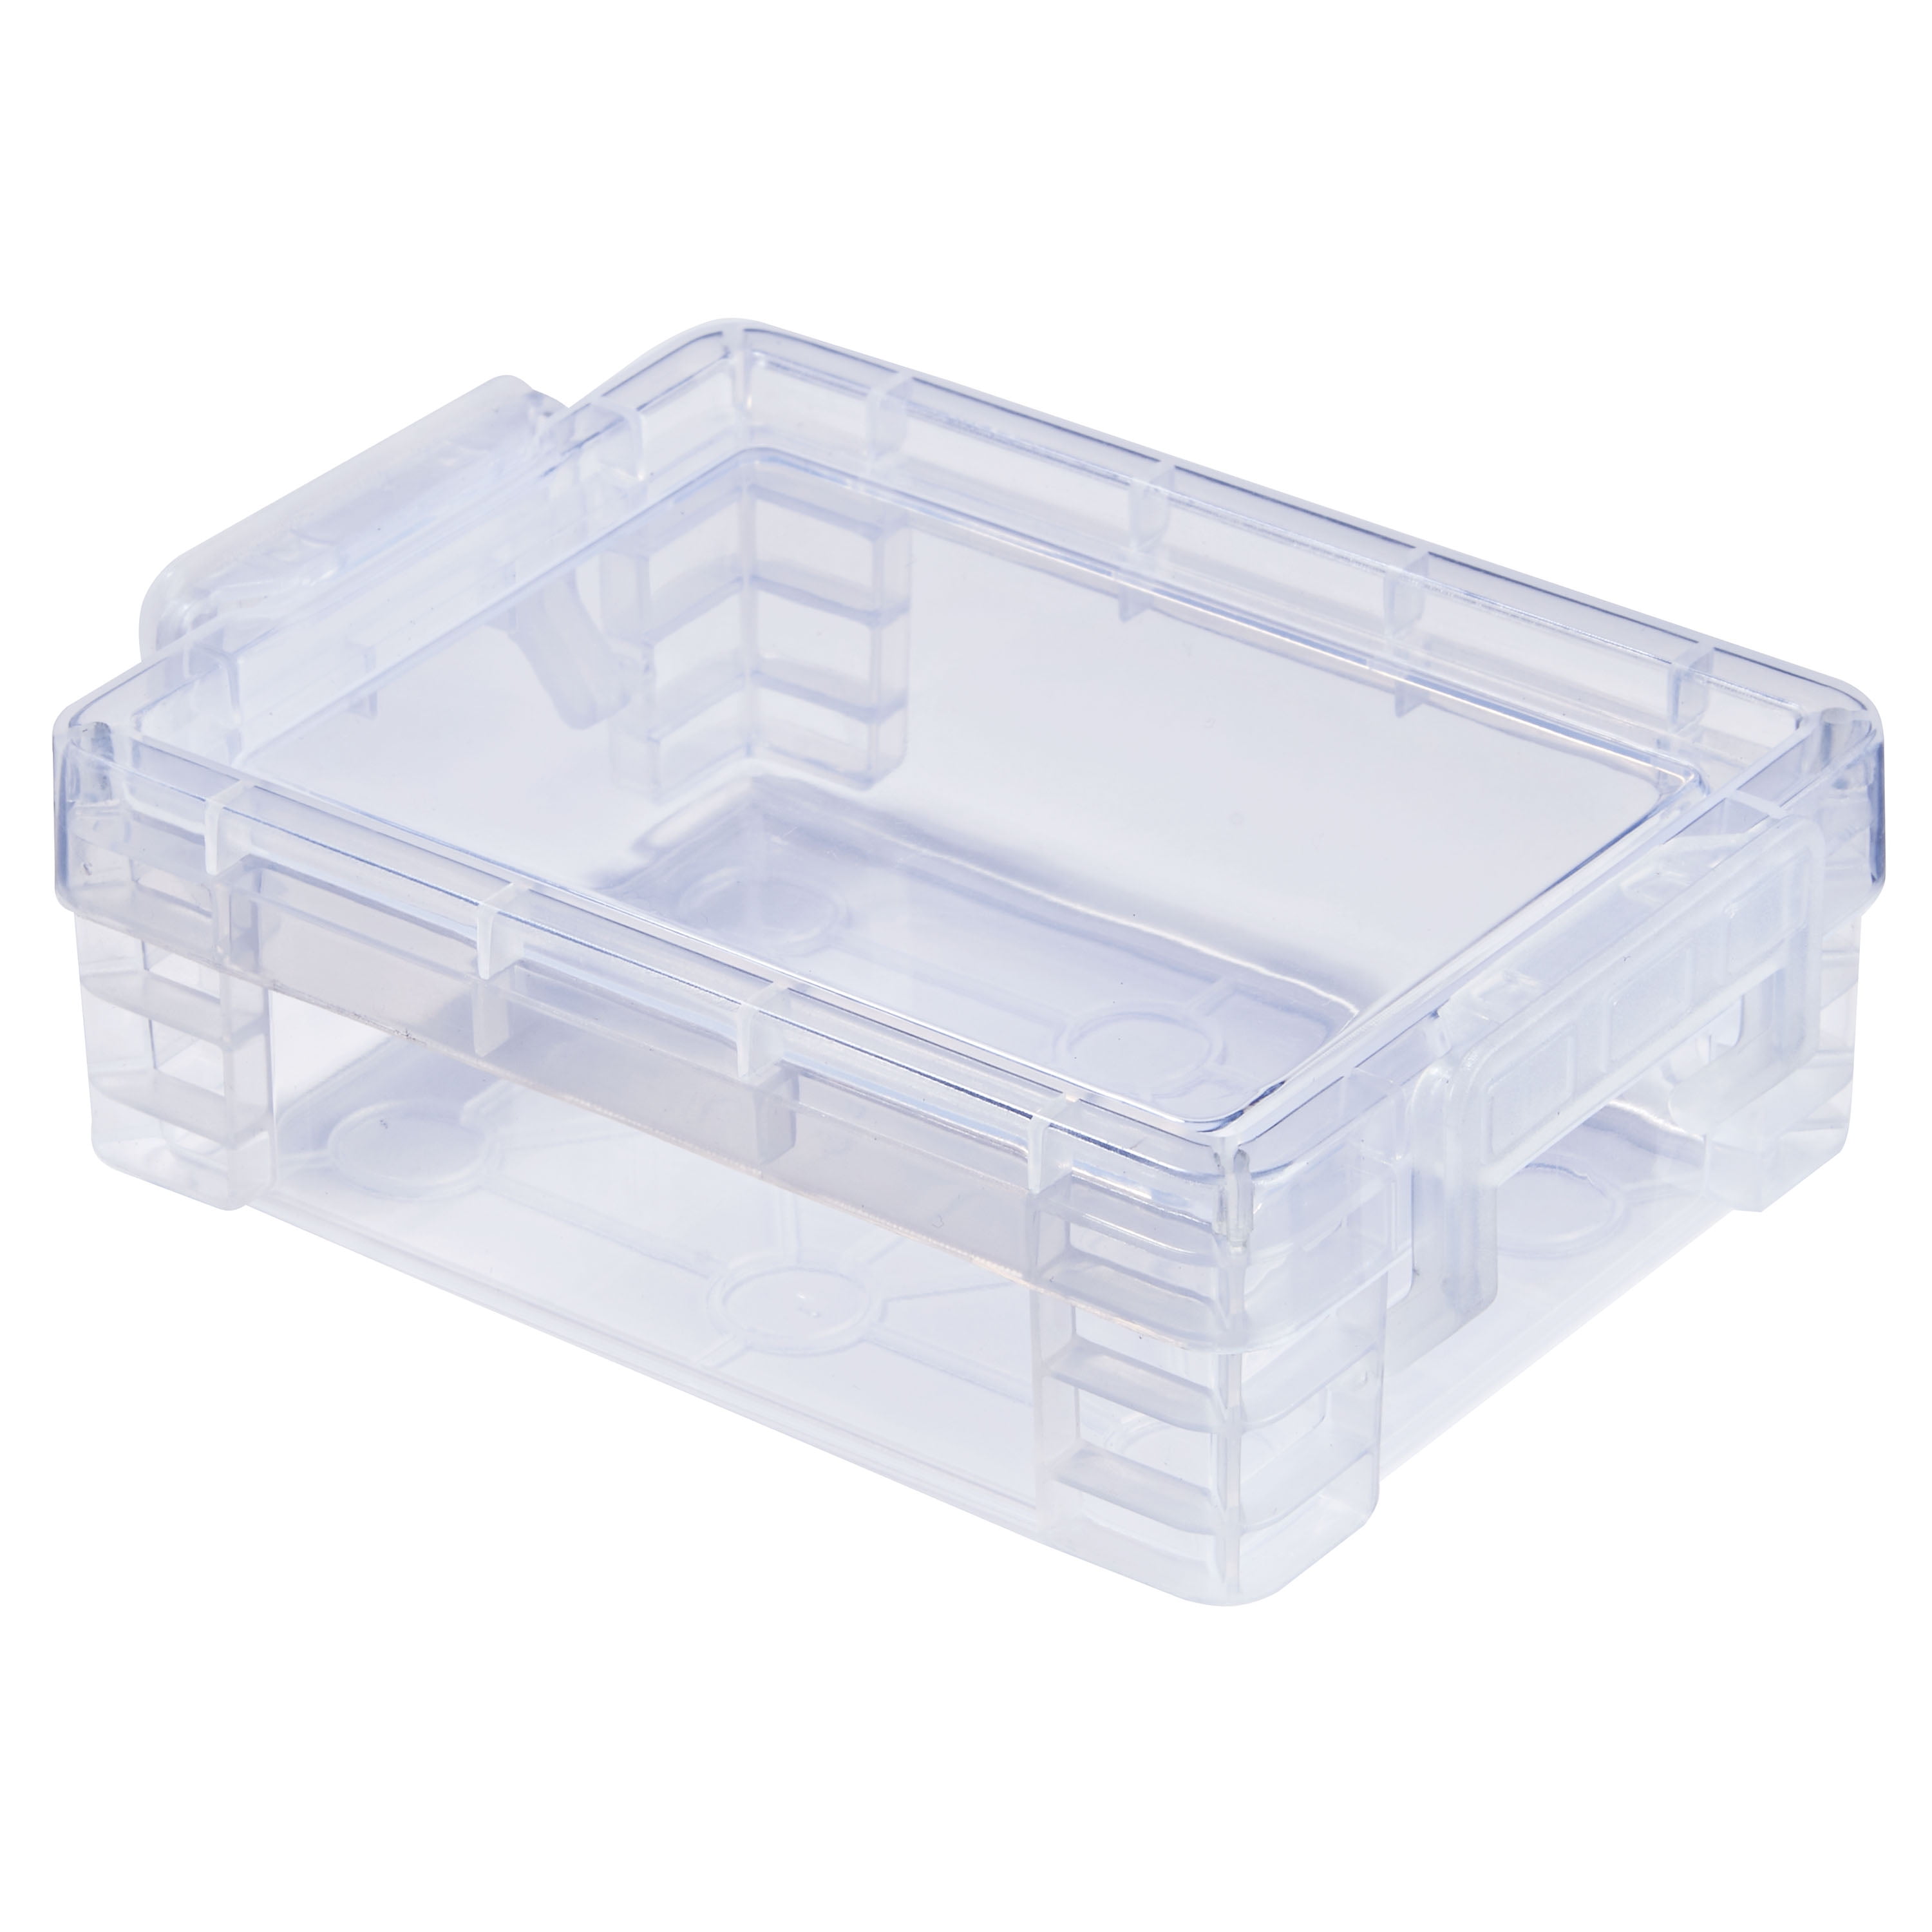 Pen + Gear Plastic Storage Stacker Box, Clear, Craft and